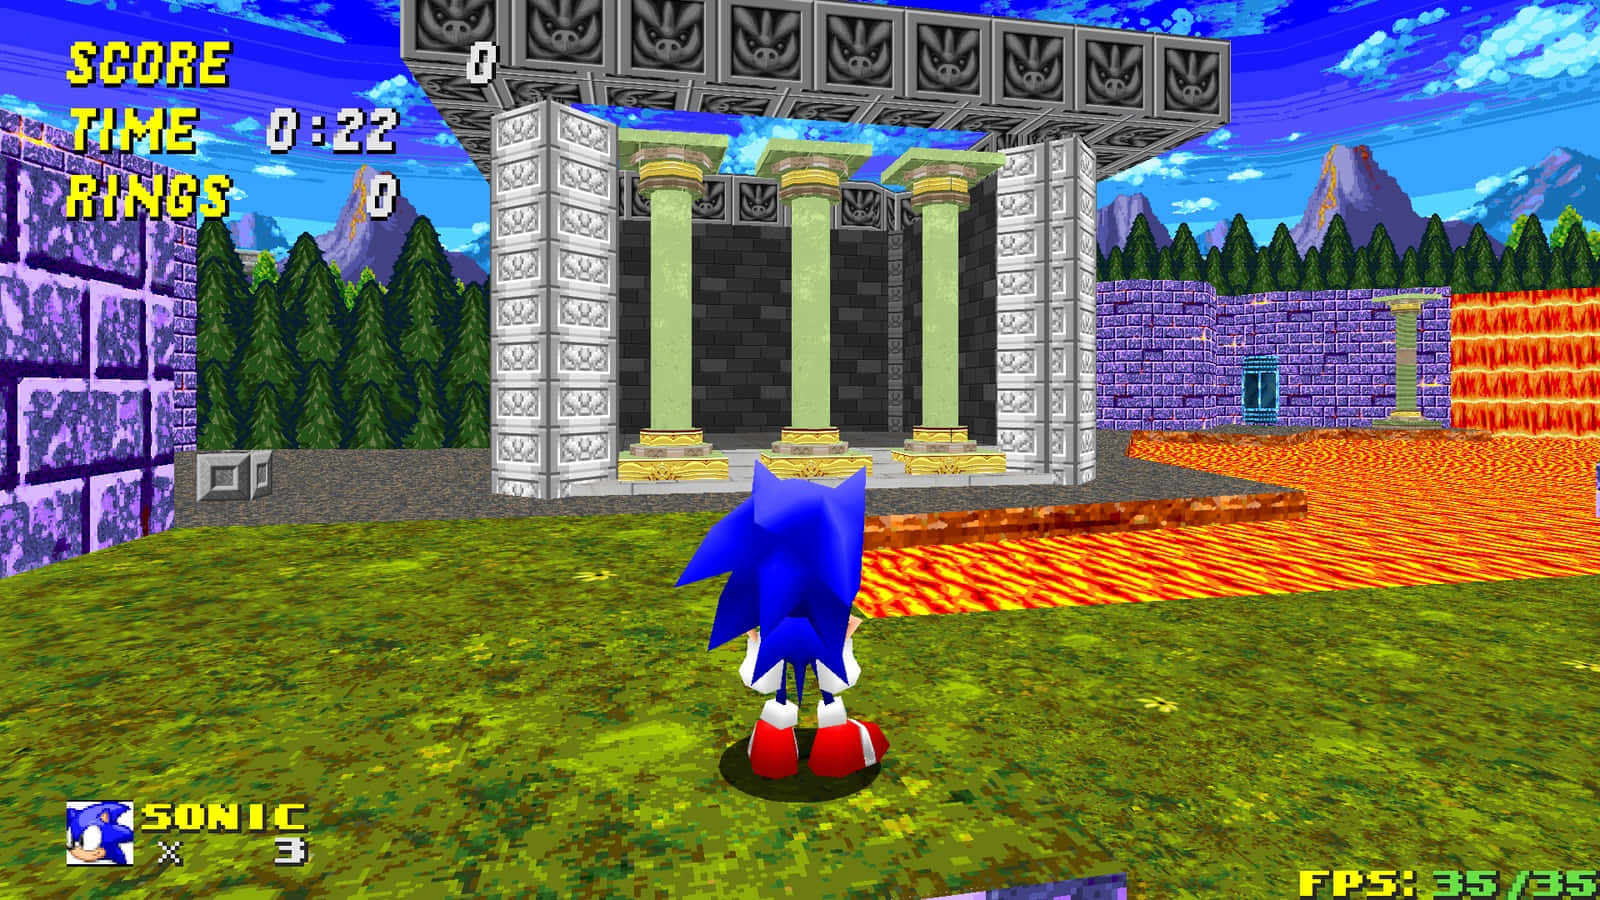 Sonic the Hedgehog exploring Marble Zone Wallpaper